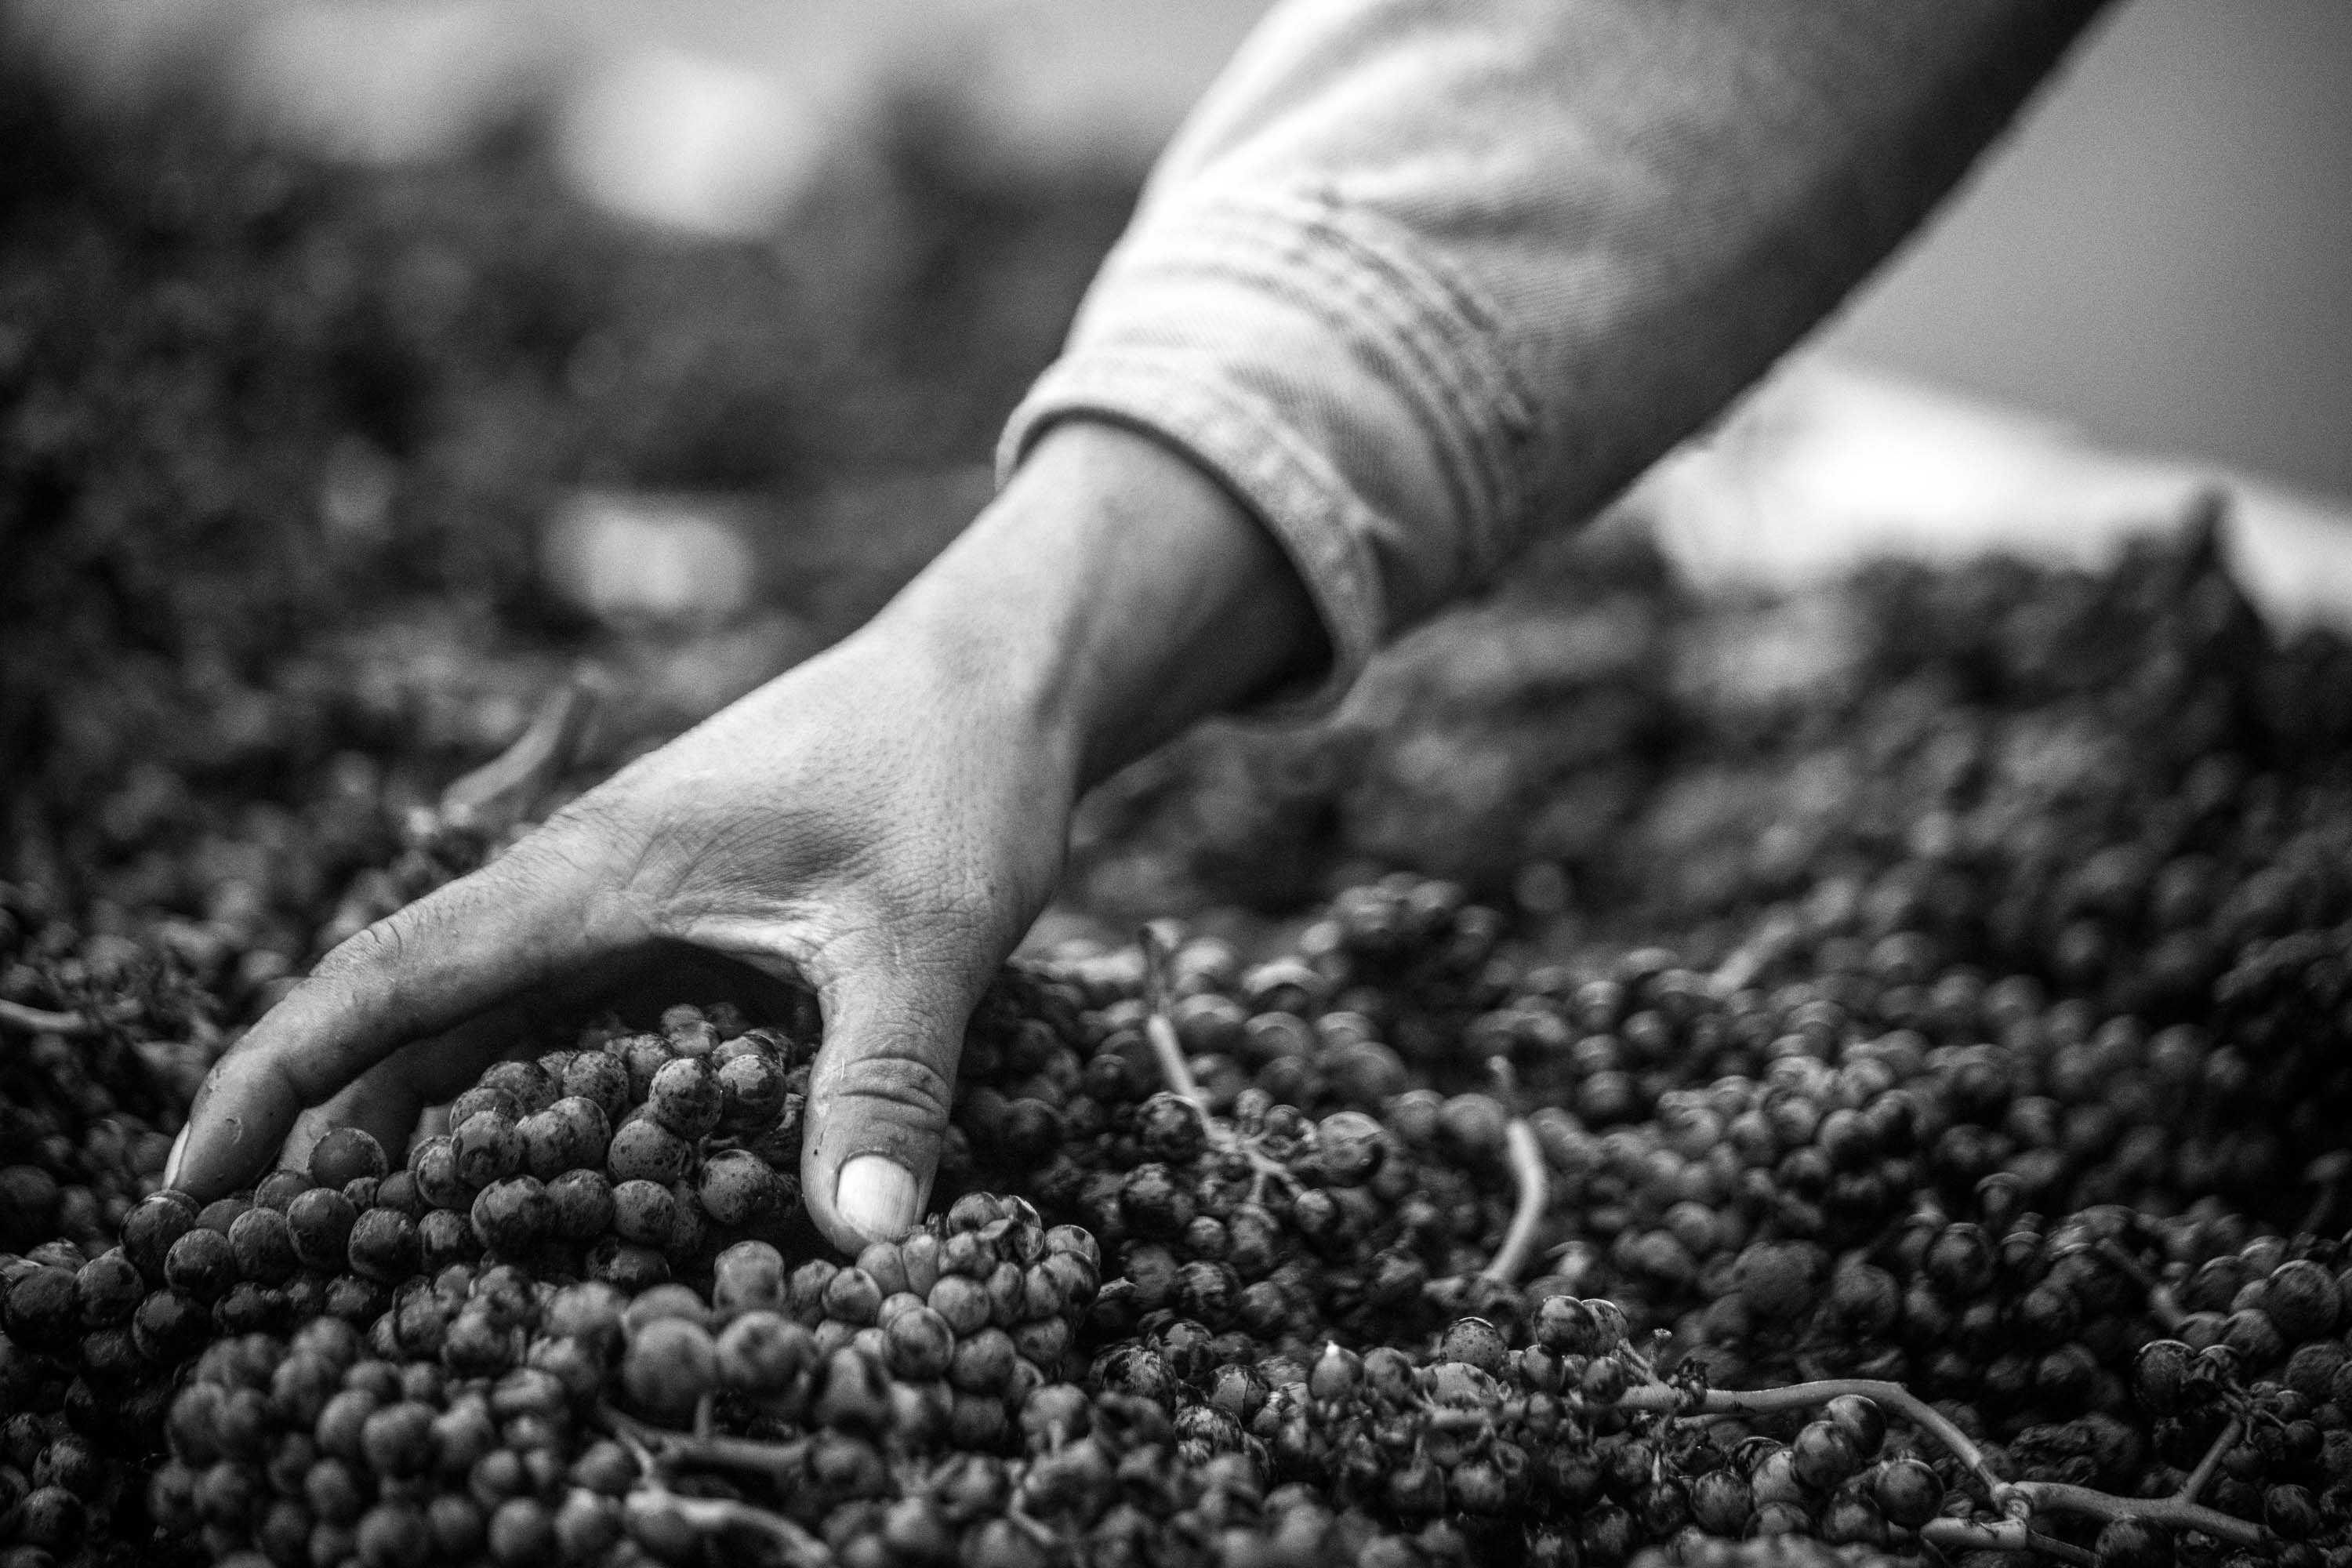 Cerise vineyard worker reaching into a bin of freshly harvested grapes.